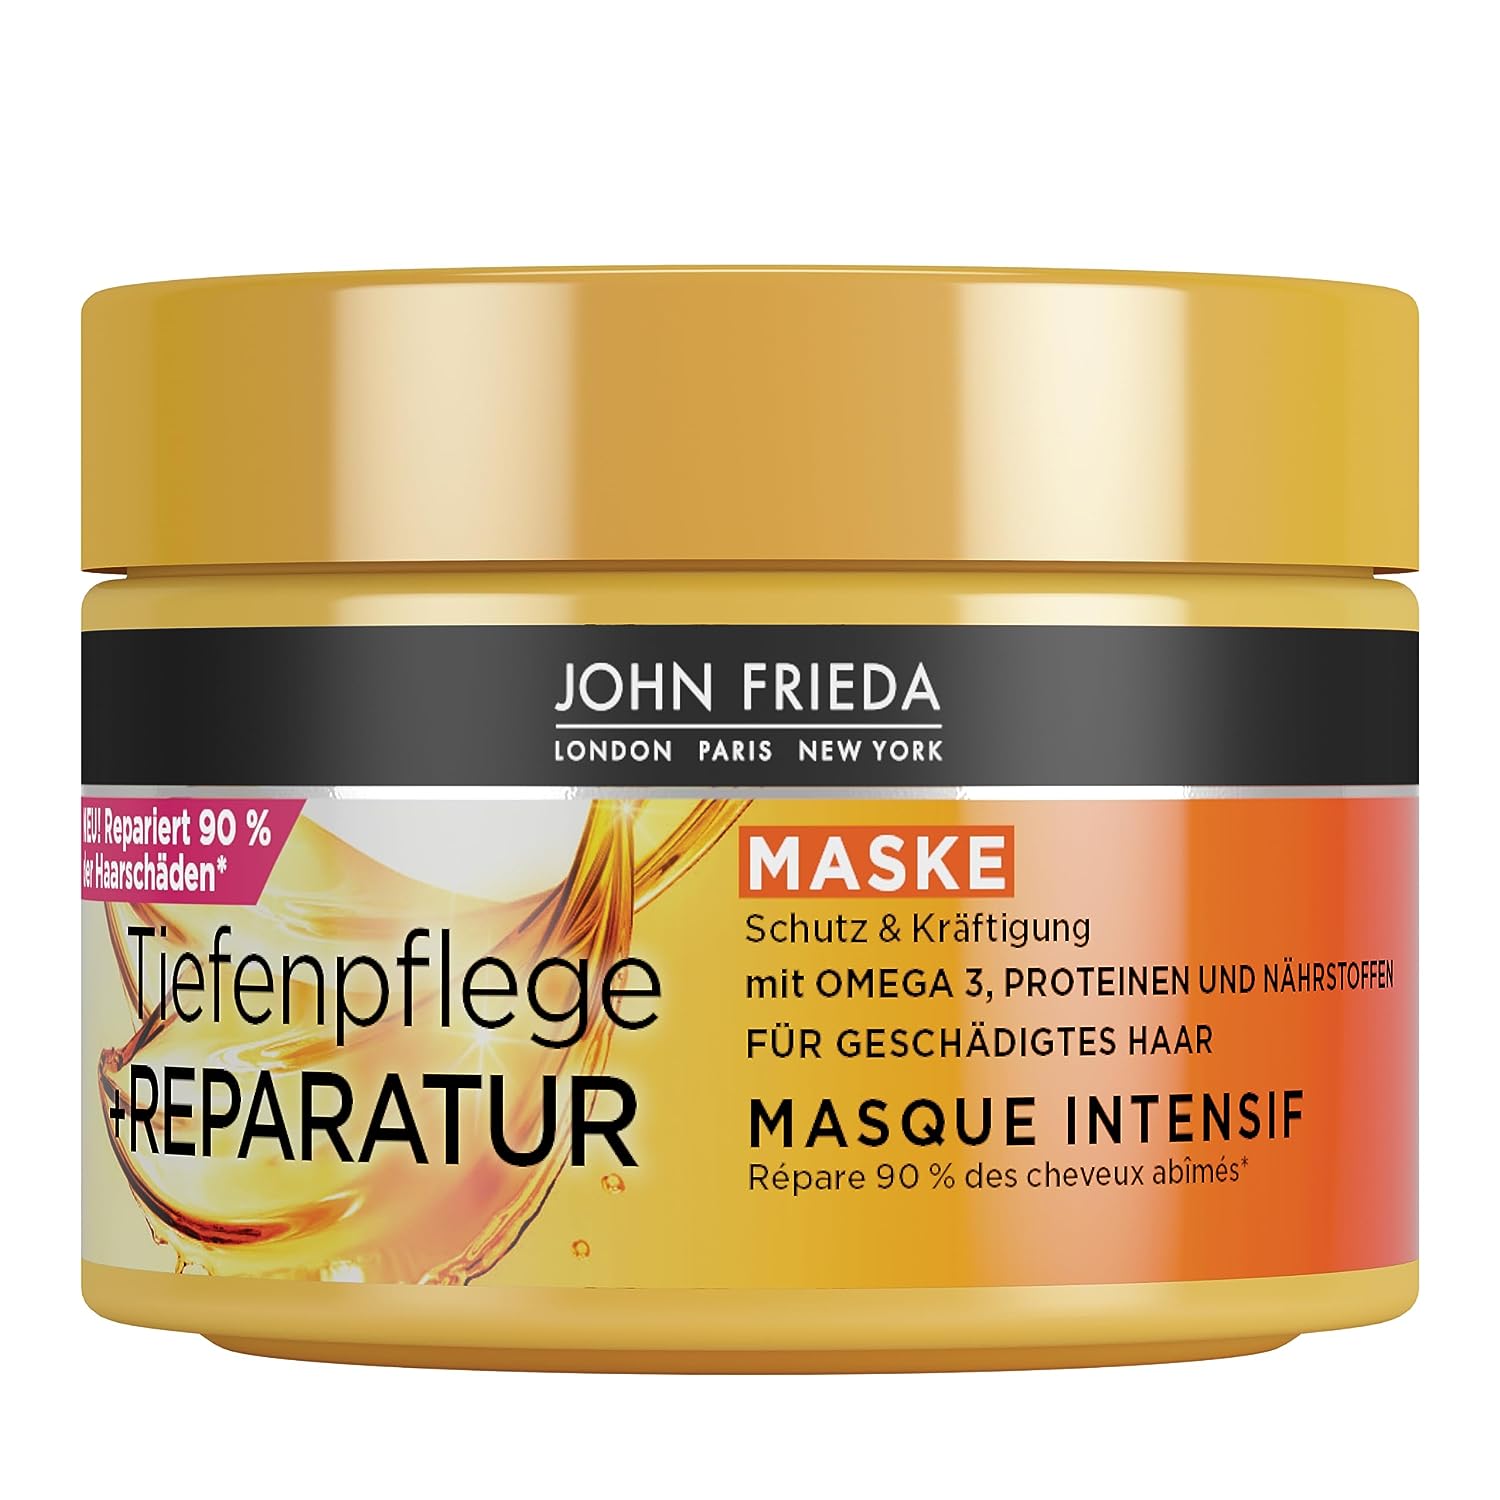 John Frieda Deep Care + Repair – Hair Treatment / Mask – Contents: 250 ml – For Damaged, Extremely Damaged Hair